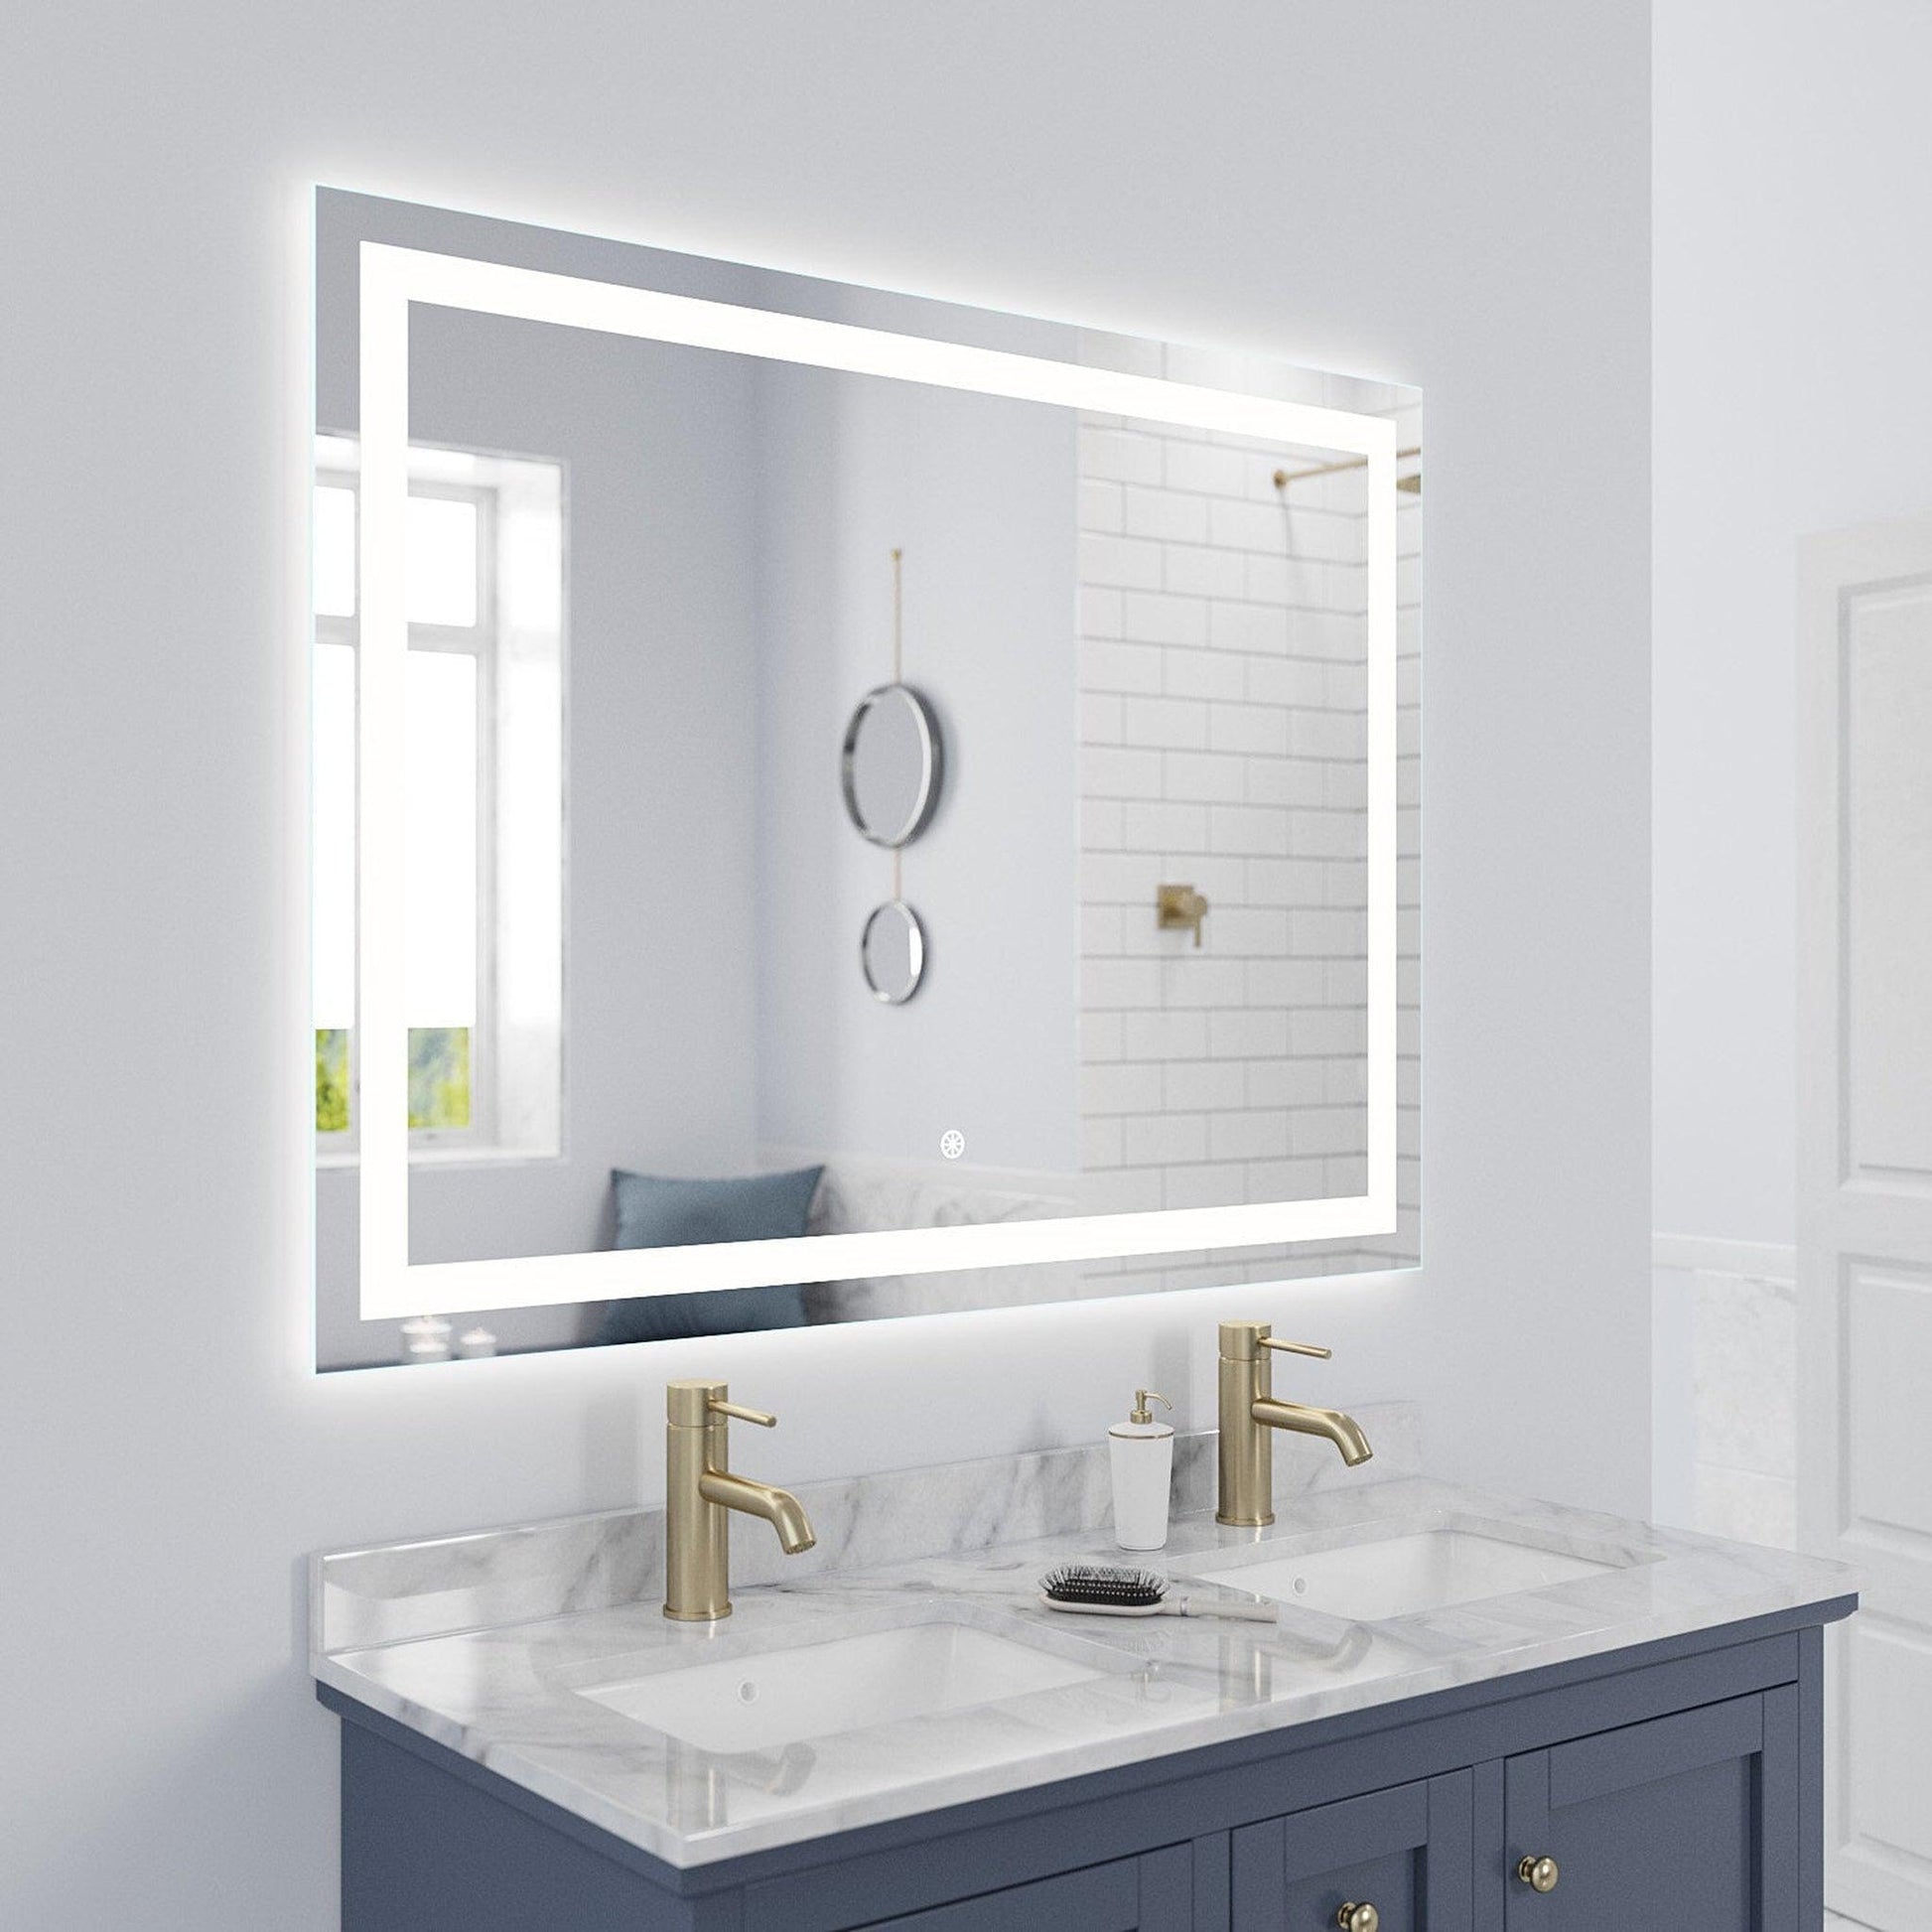 Luxaar Lumina 48" x 36" LED Lighted Vanity Mirror With Built-in Dimmer and Anti-Fog